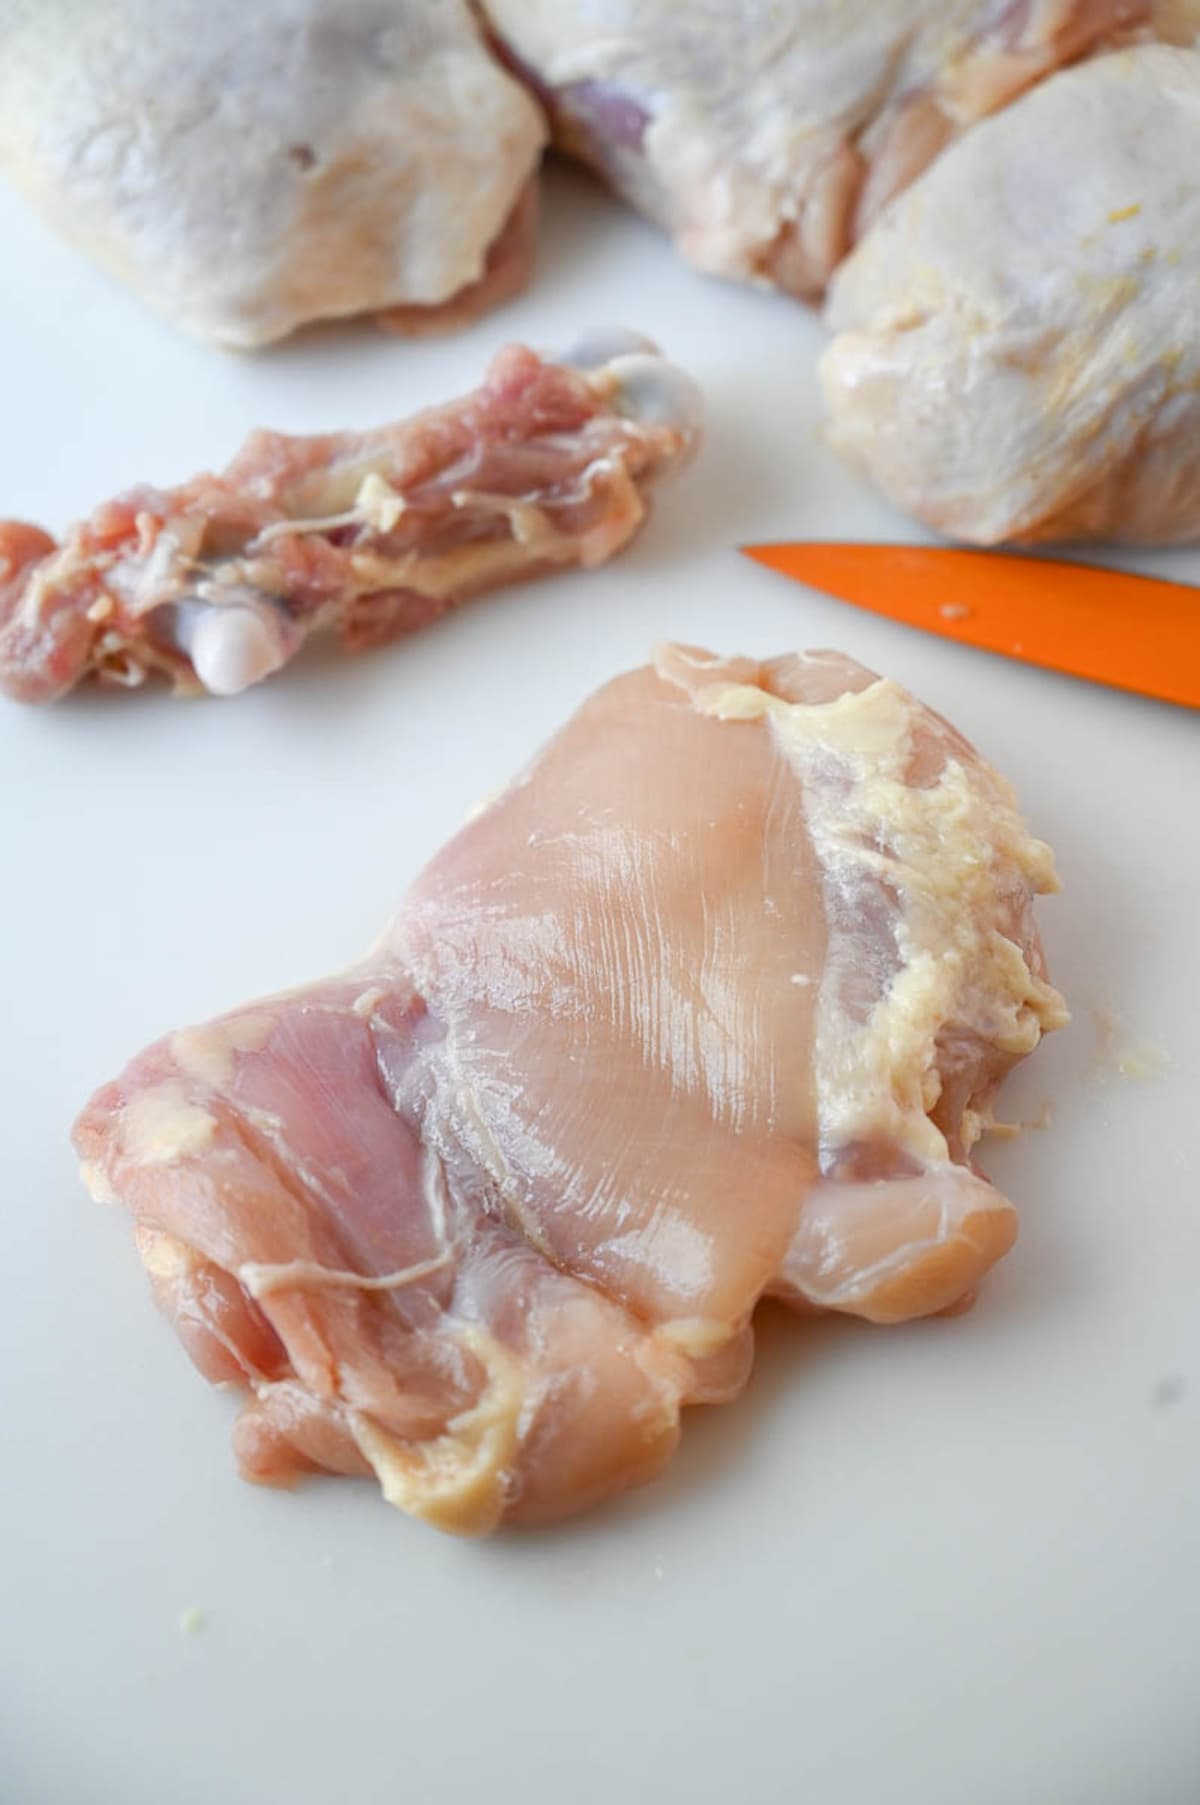 A deboned chicken thigh on a cutting board with the removed bone in the background.